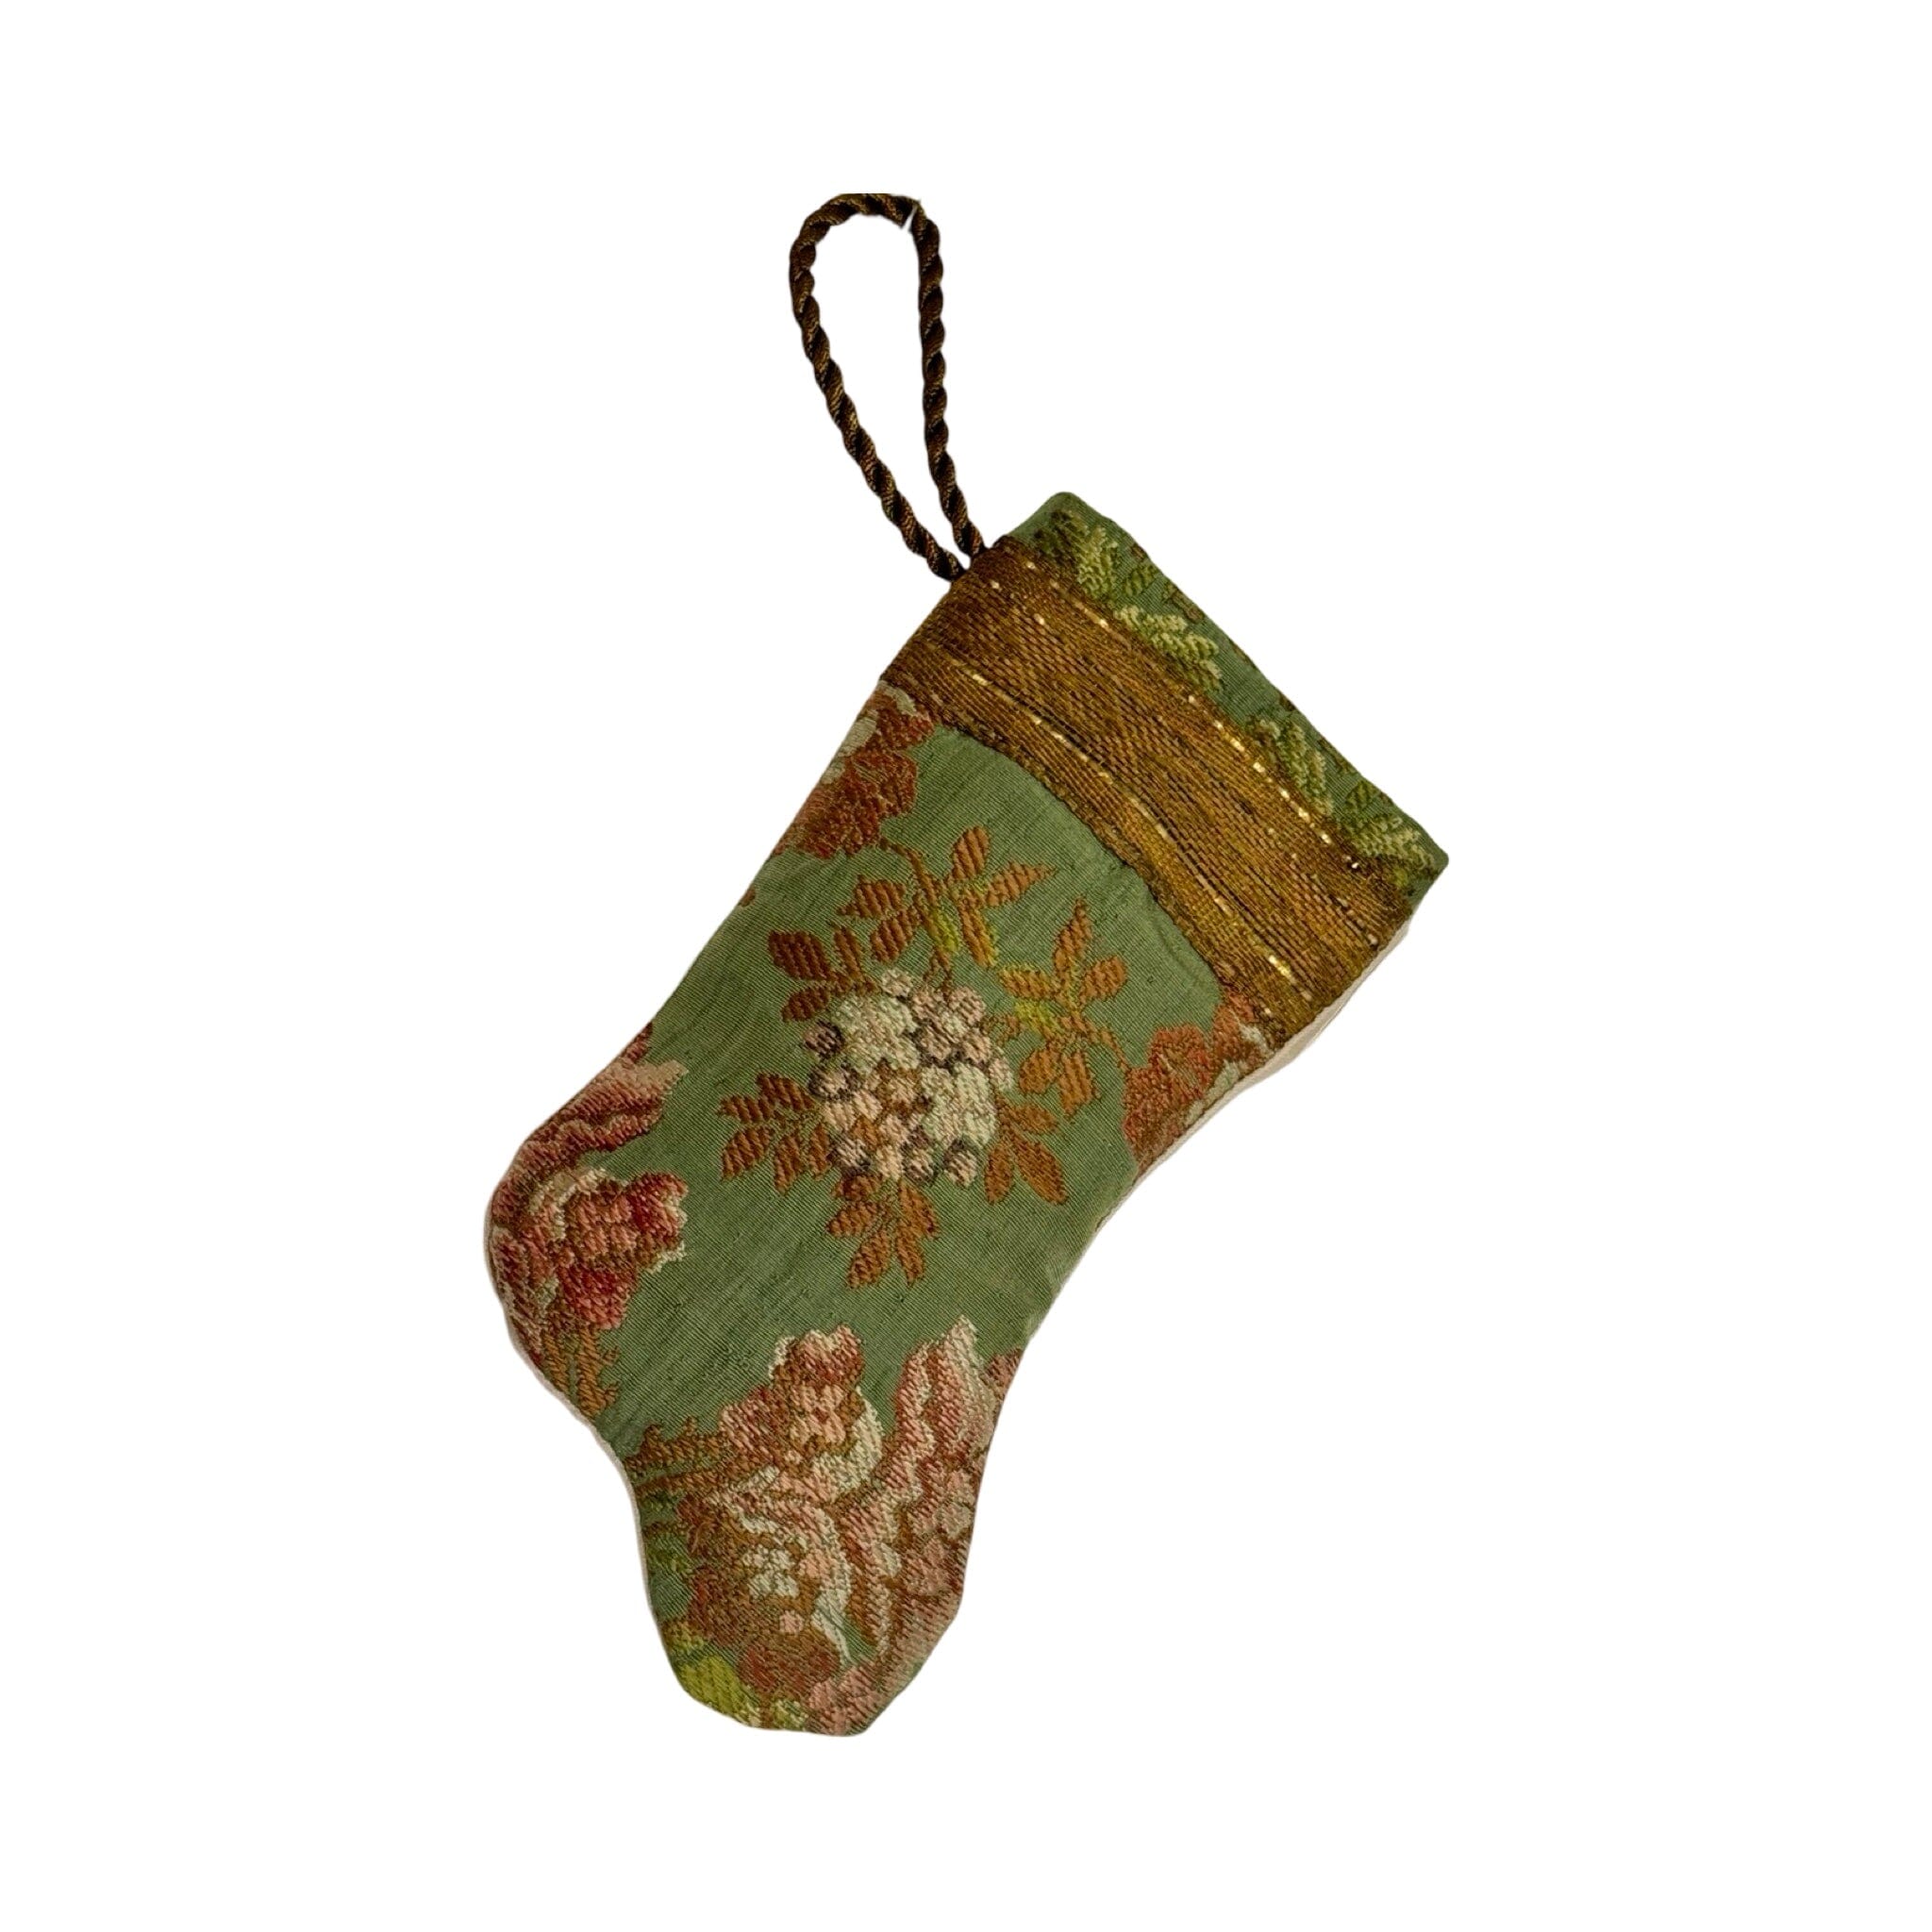 Handmade Mini Stocking Made From Vintage Fabric and Trims- Green Floral Ornament B. Viz Design G 